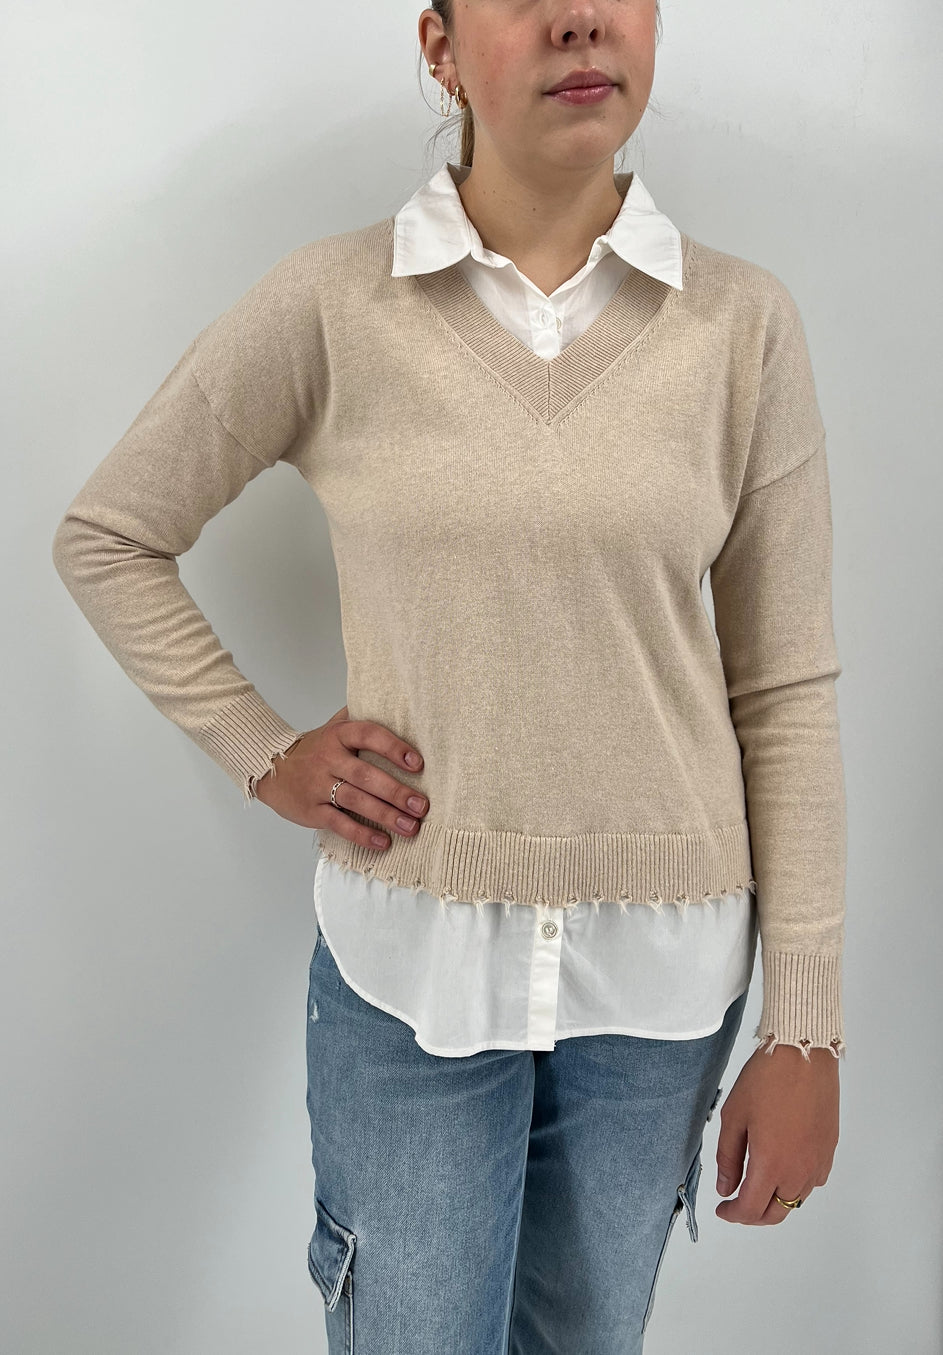 The Collared Layered V-Neck Sweater in Wicker